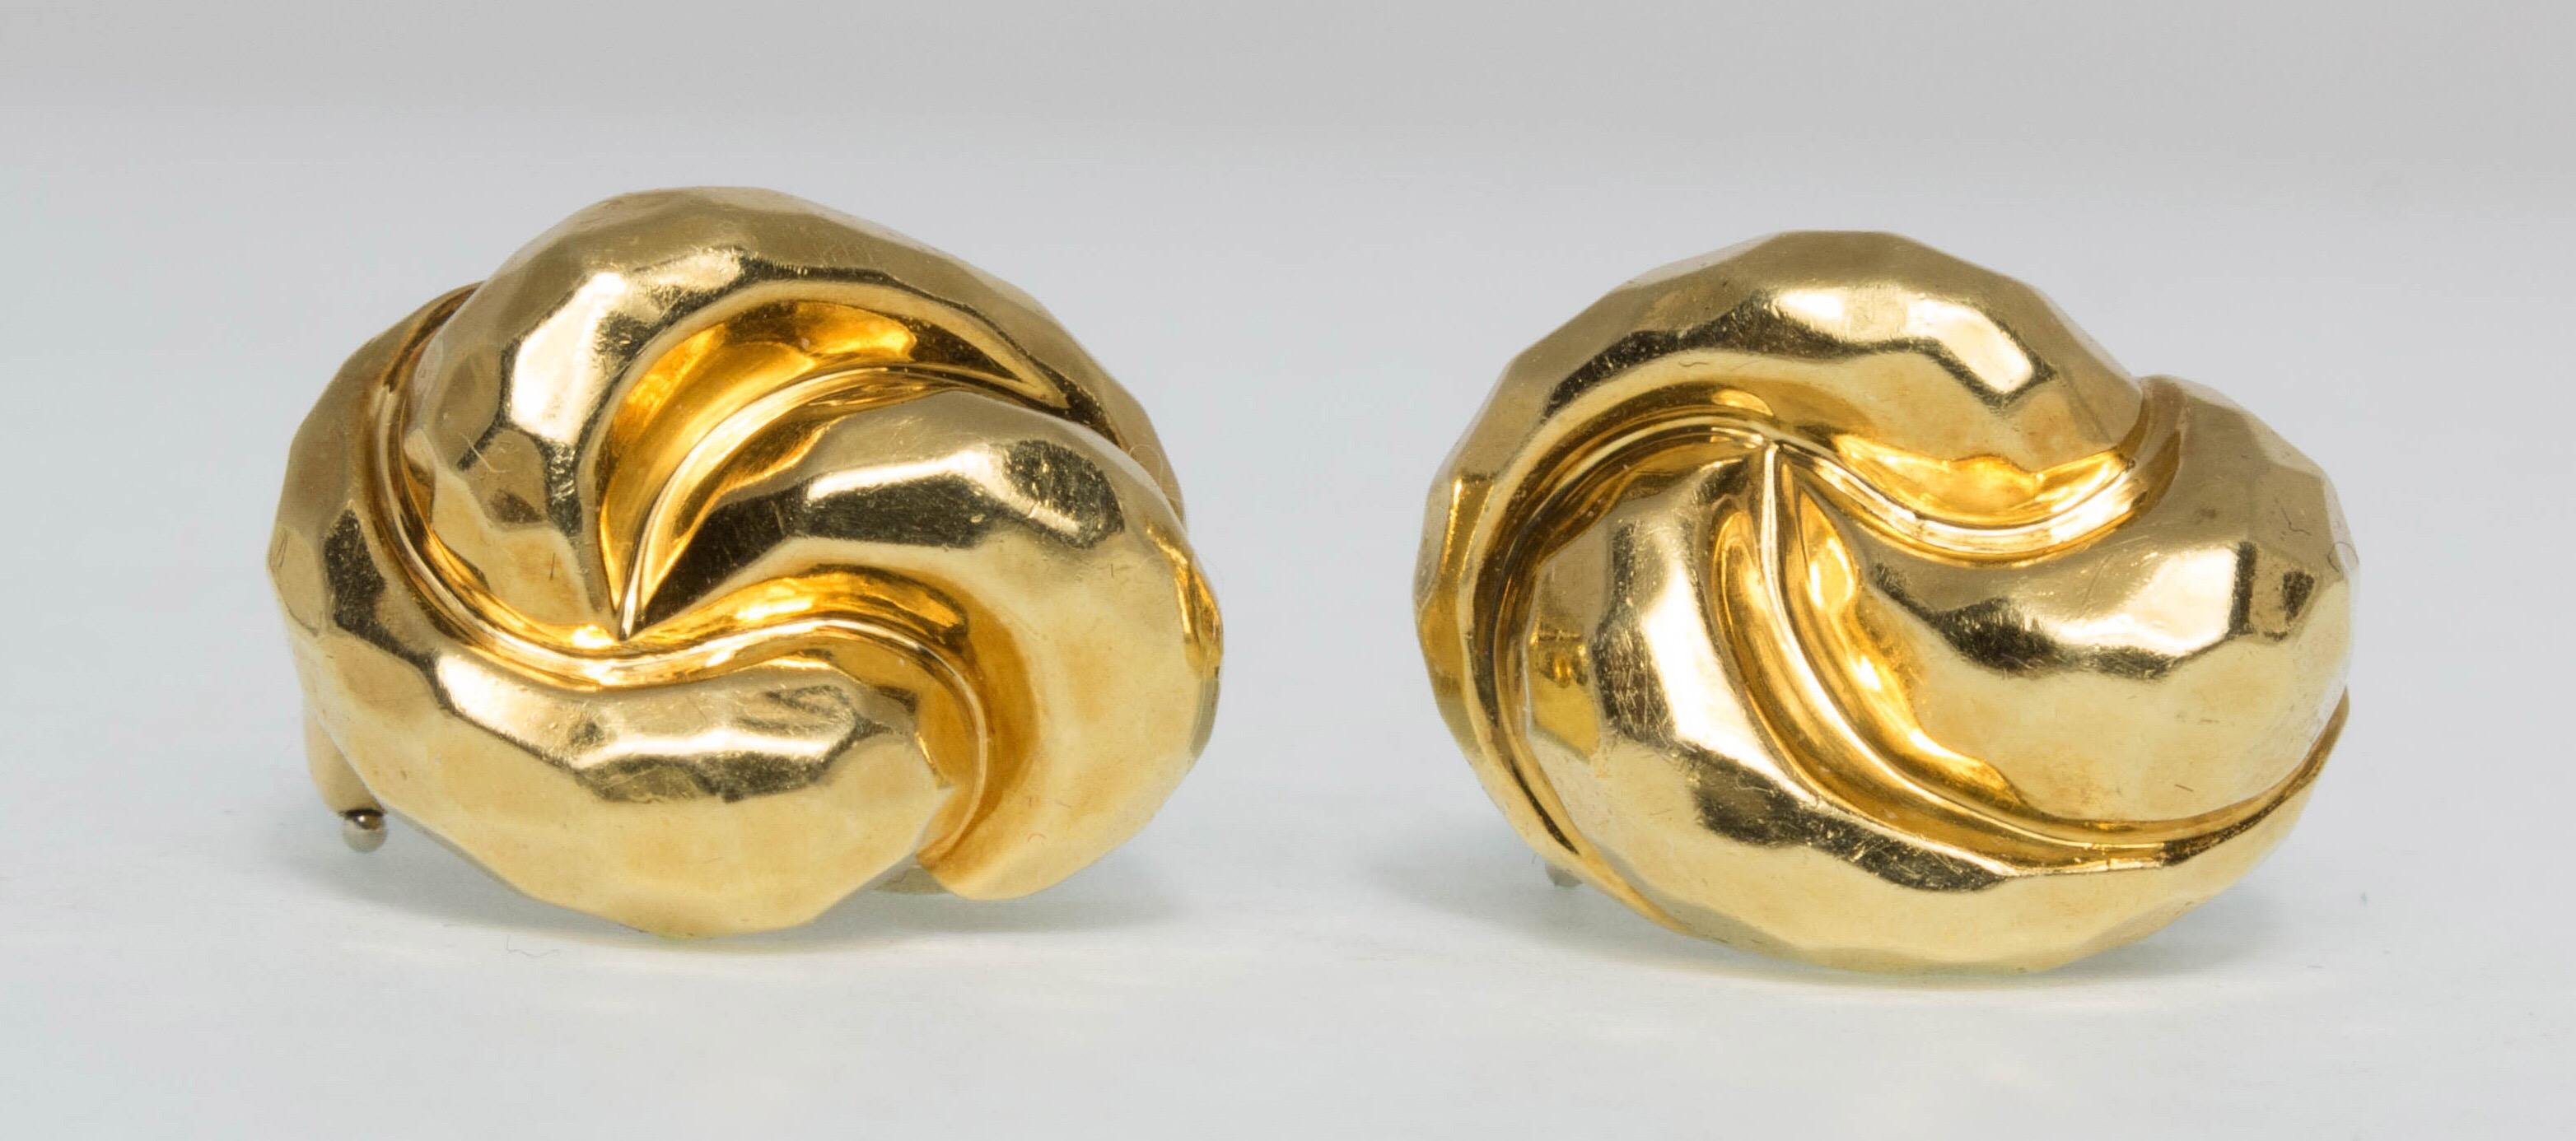 Simple, elegant and easy to wear hand hammered 18K yellow gold pair of clip on earrings by Henry Dunay. Signed Dunay, stamped 18K, 750. Number A5319.
Measured 0.75